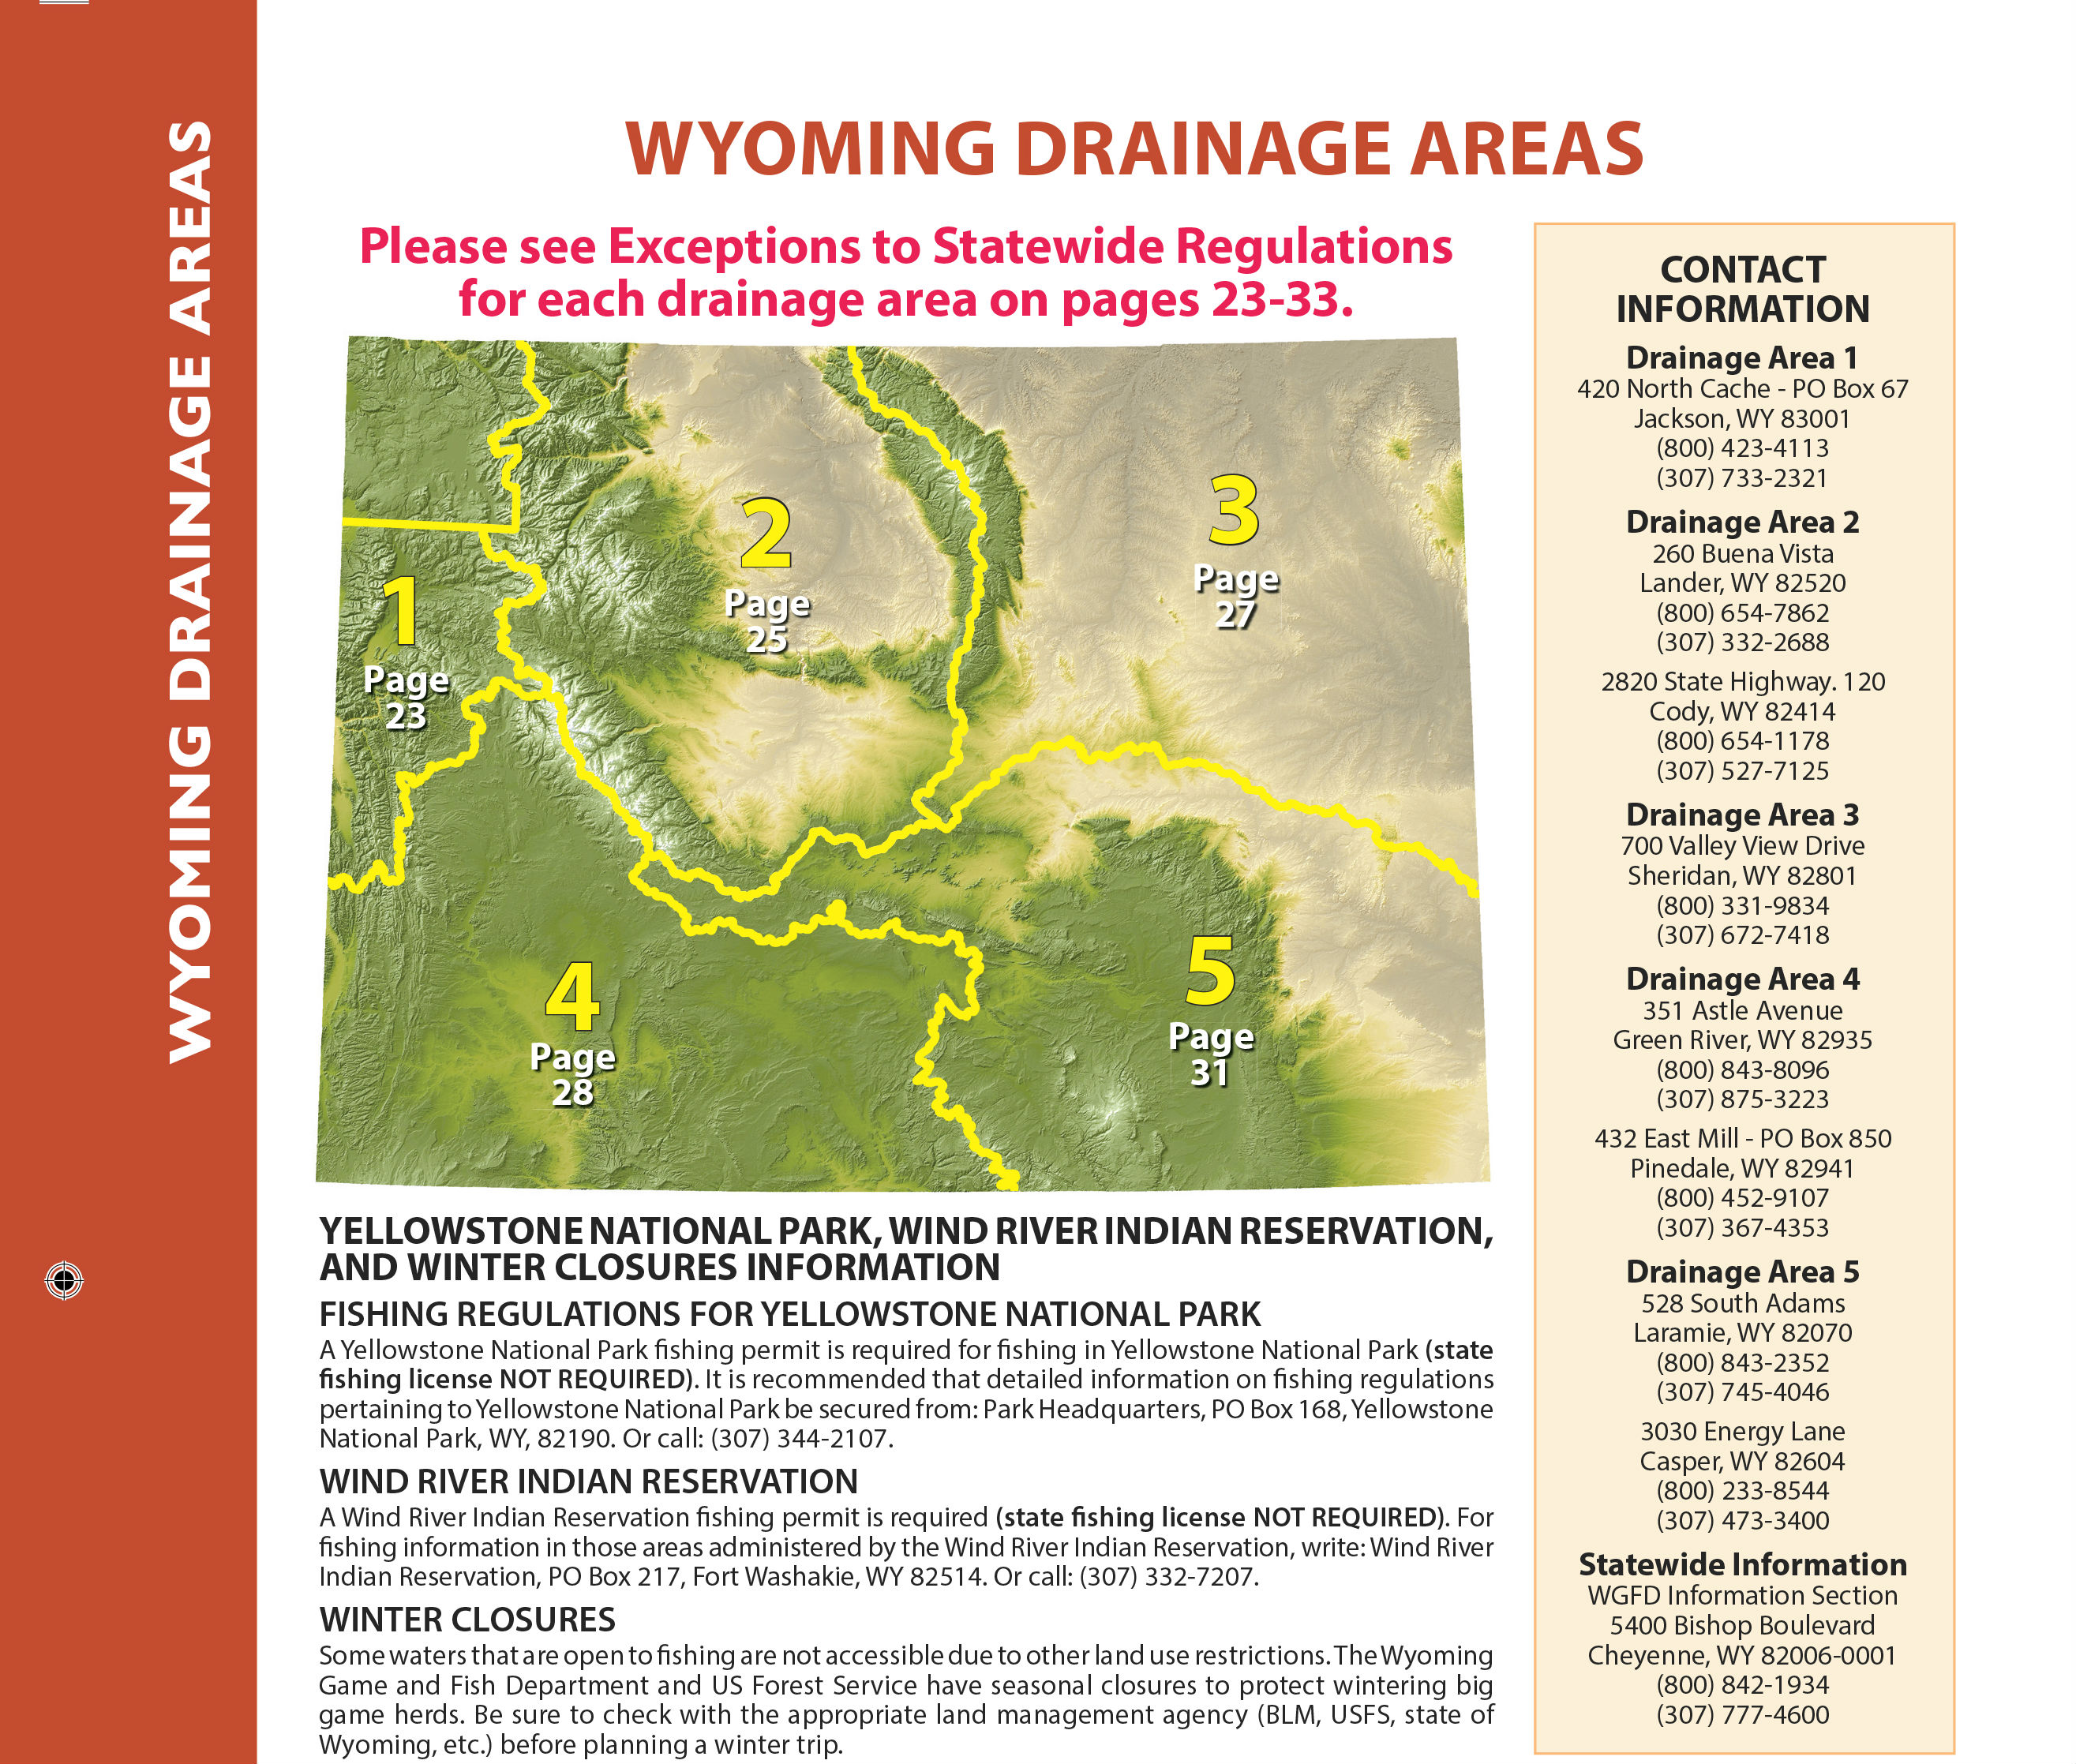 page from the 2016 fishing regulations showing drainage area boundaries